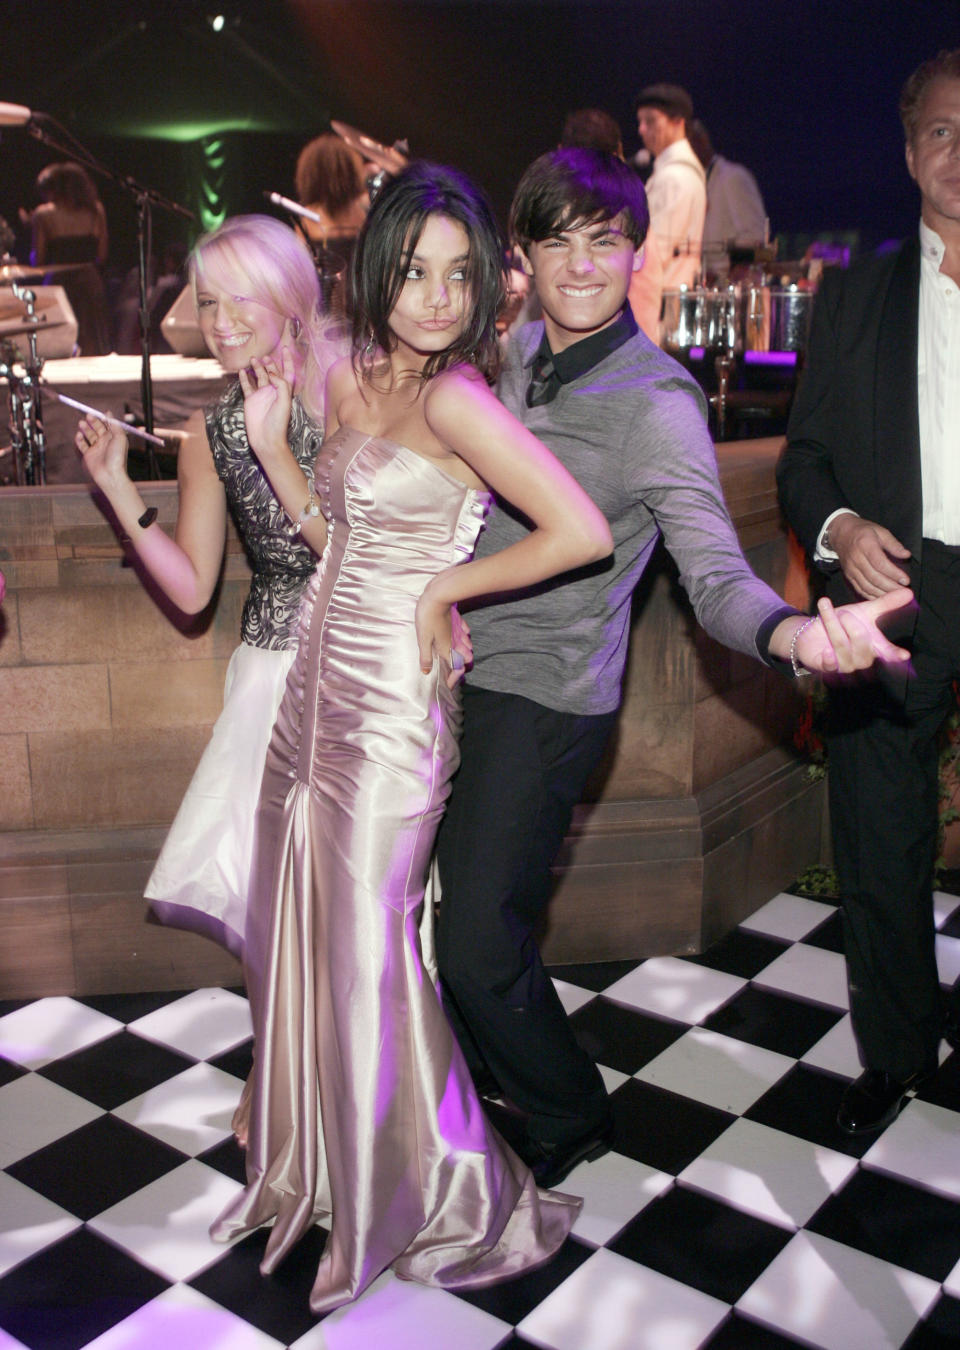 <p>He totes got down on the dance floor though. This is a strangely sexual photo, TBH.</p>